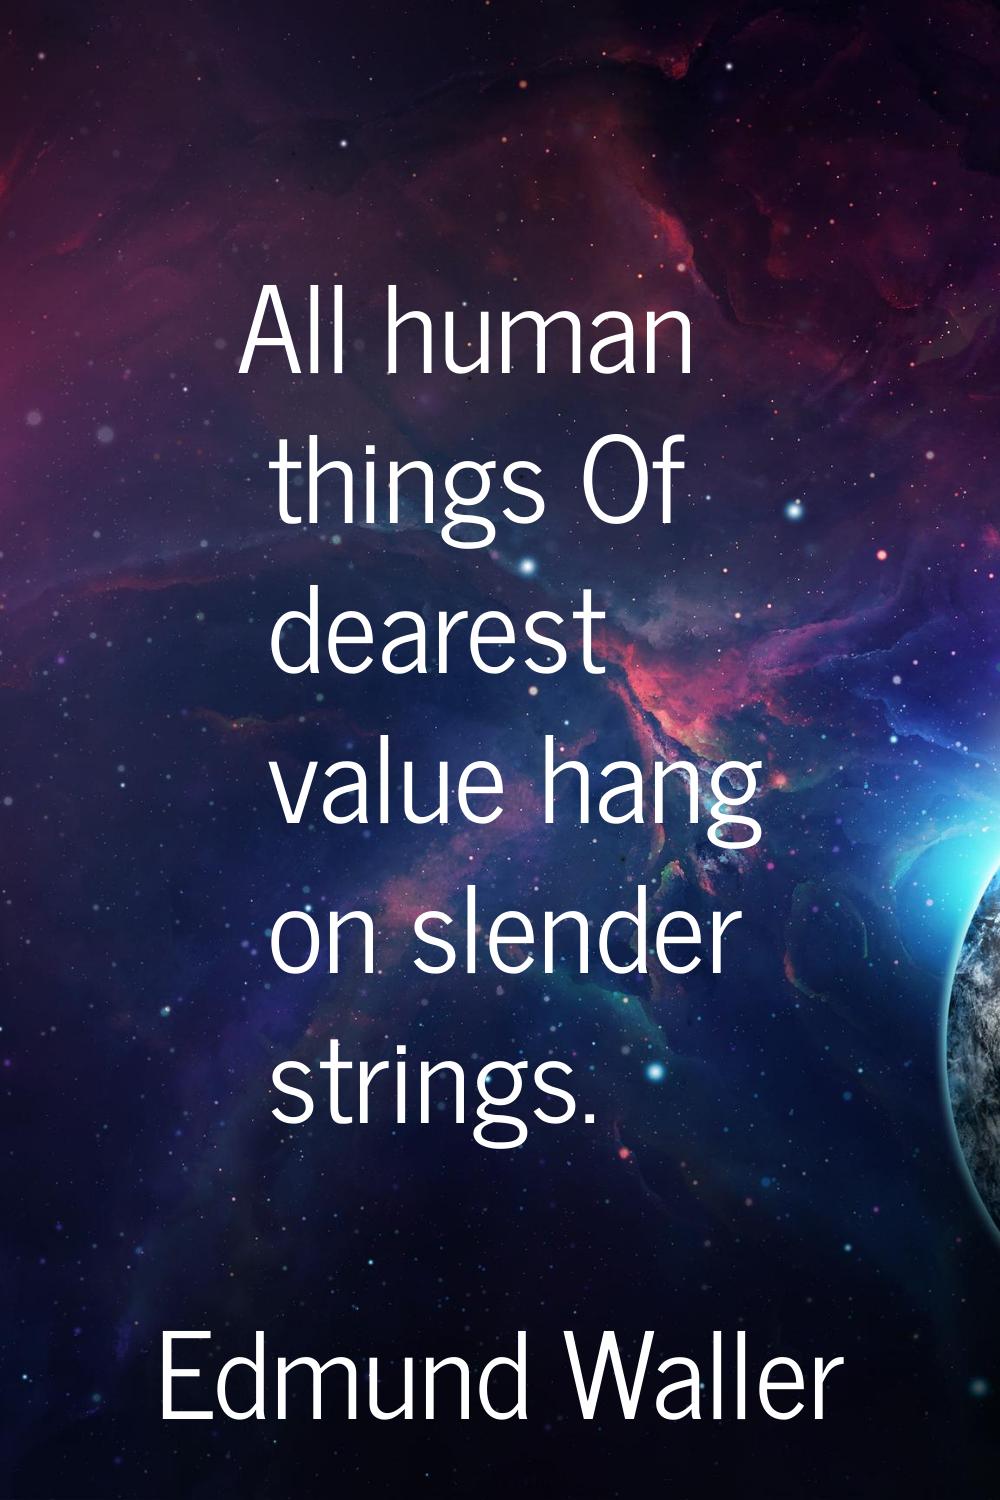 All human things Of dearest value hang on slender strings.